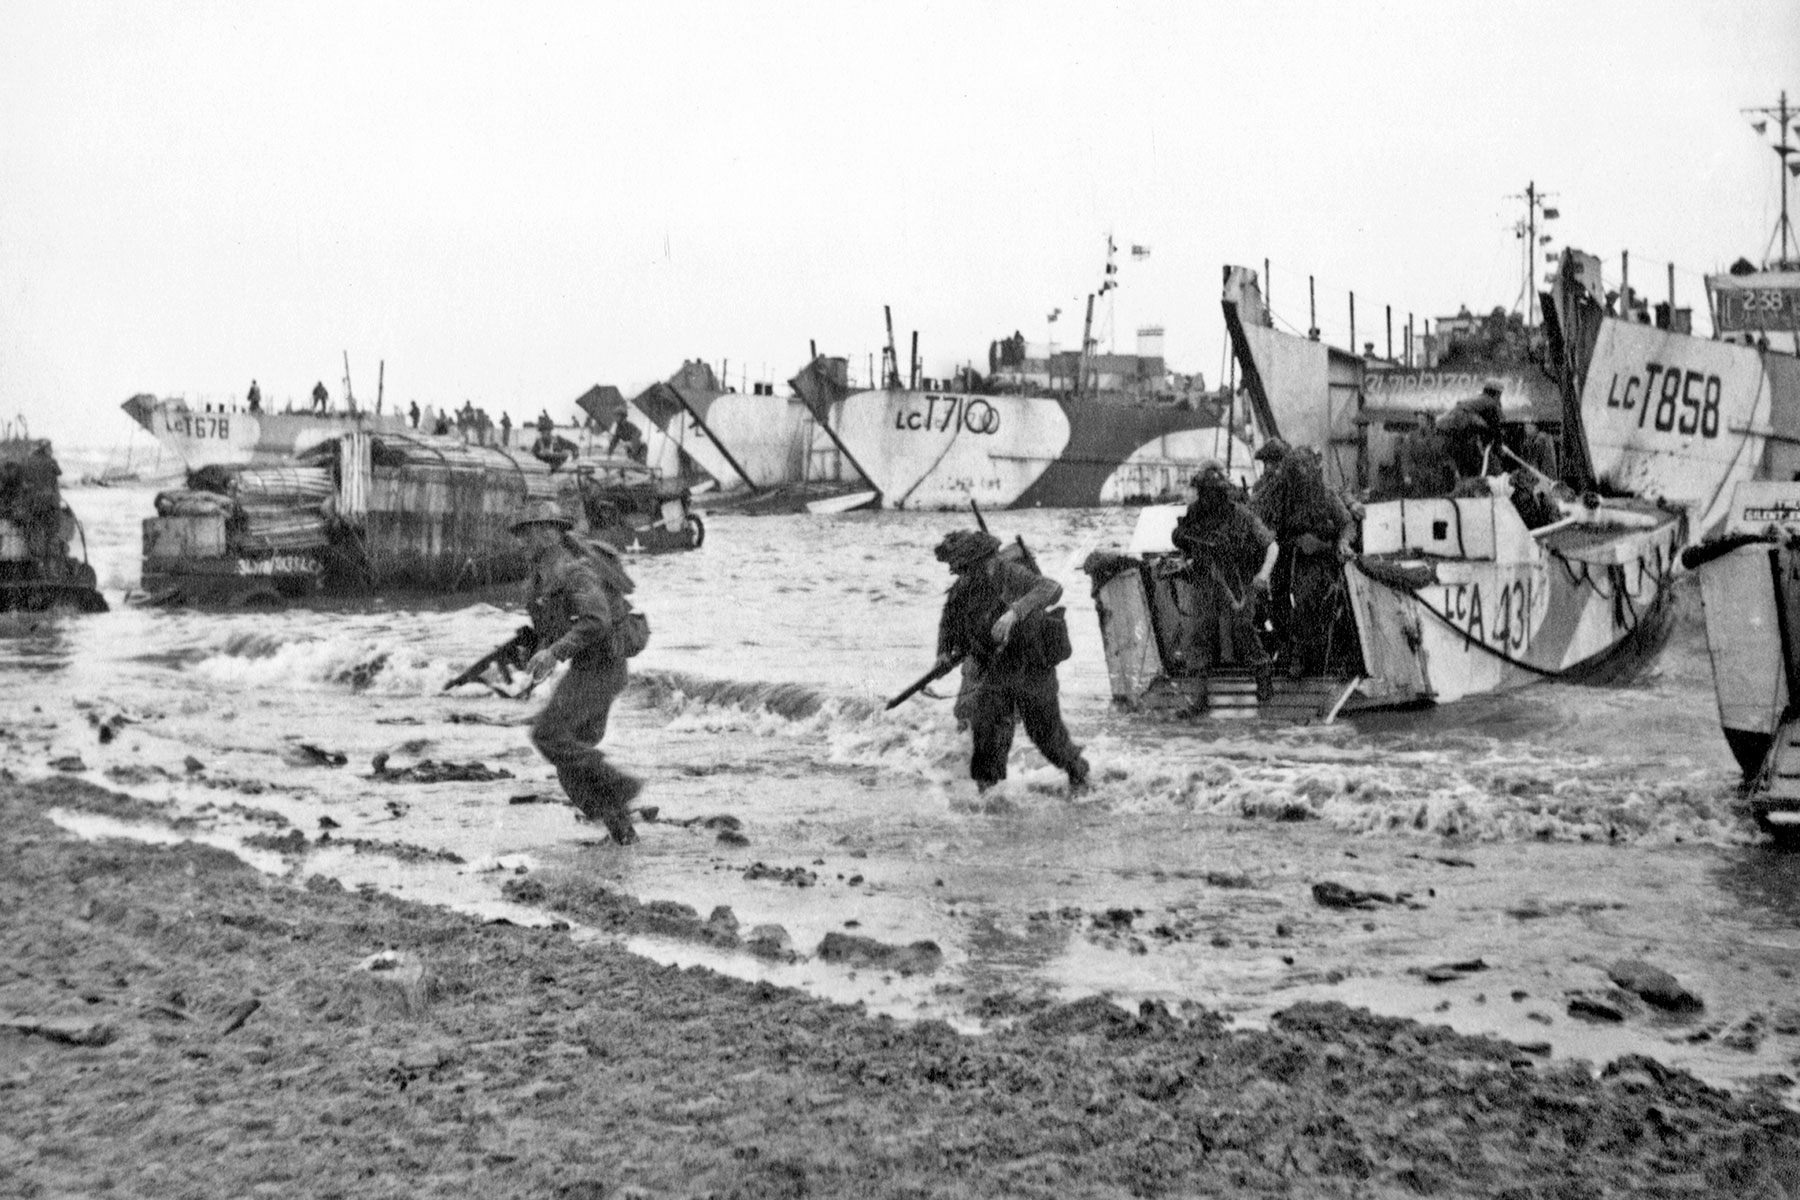 TheVeteran.UK launches D-Day80: Marking the 80th Anniversary of Normandy Landings